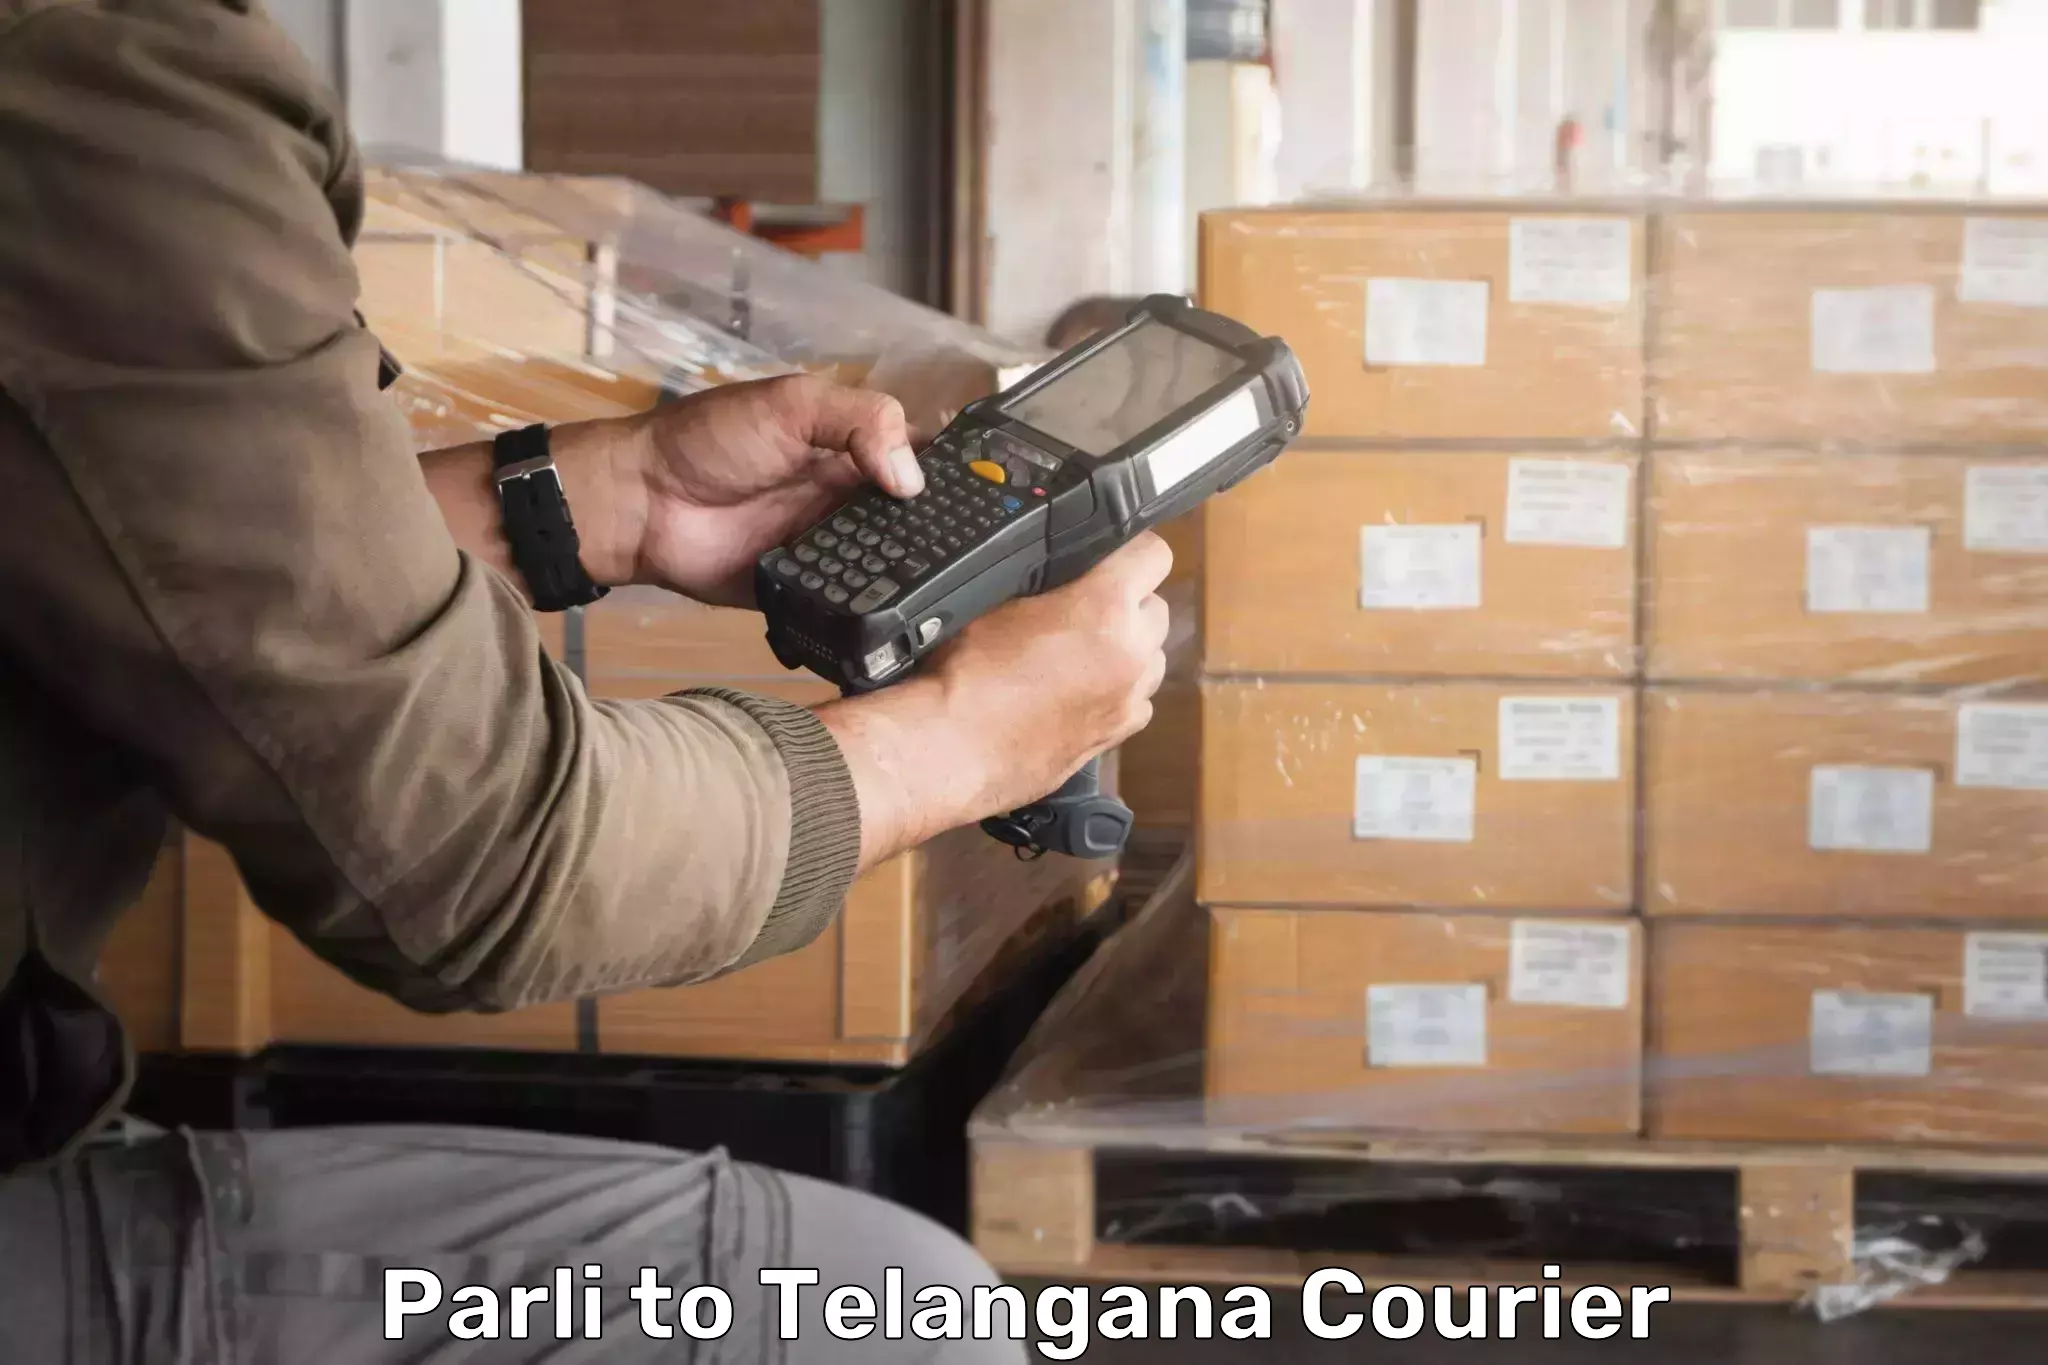 Nationwide courier service Parli to Telangana